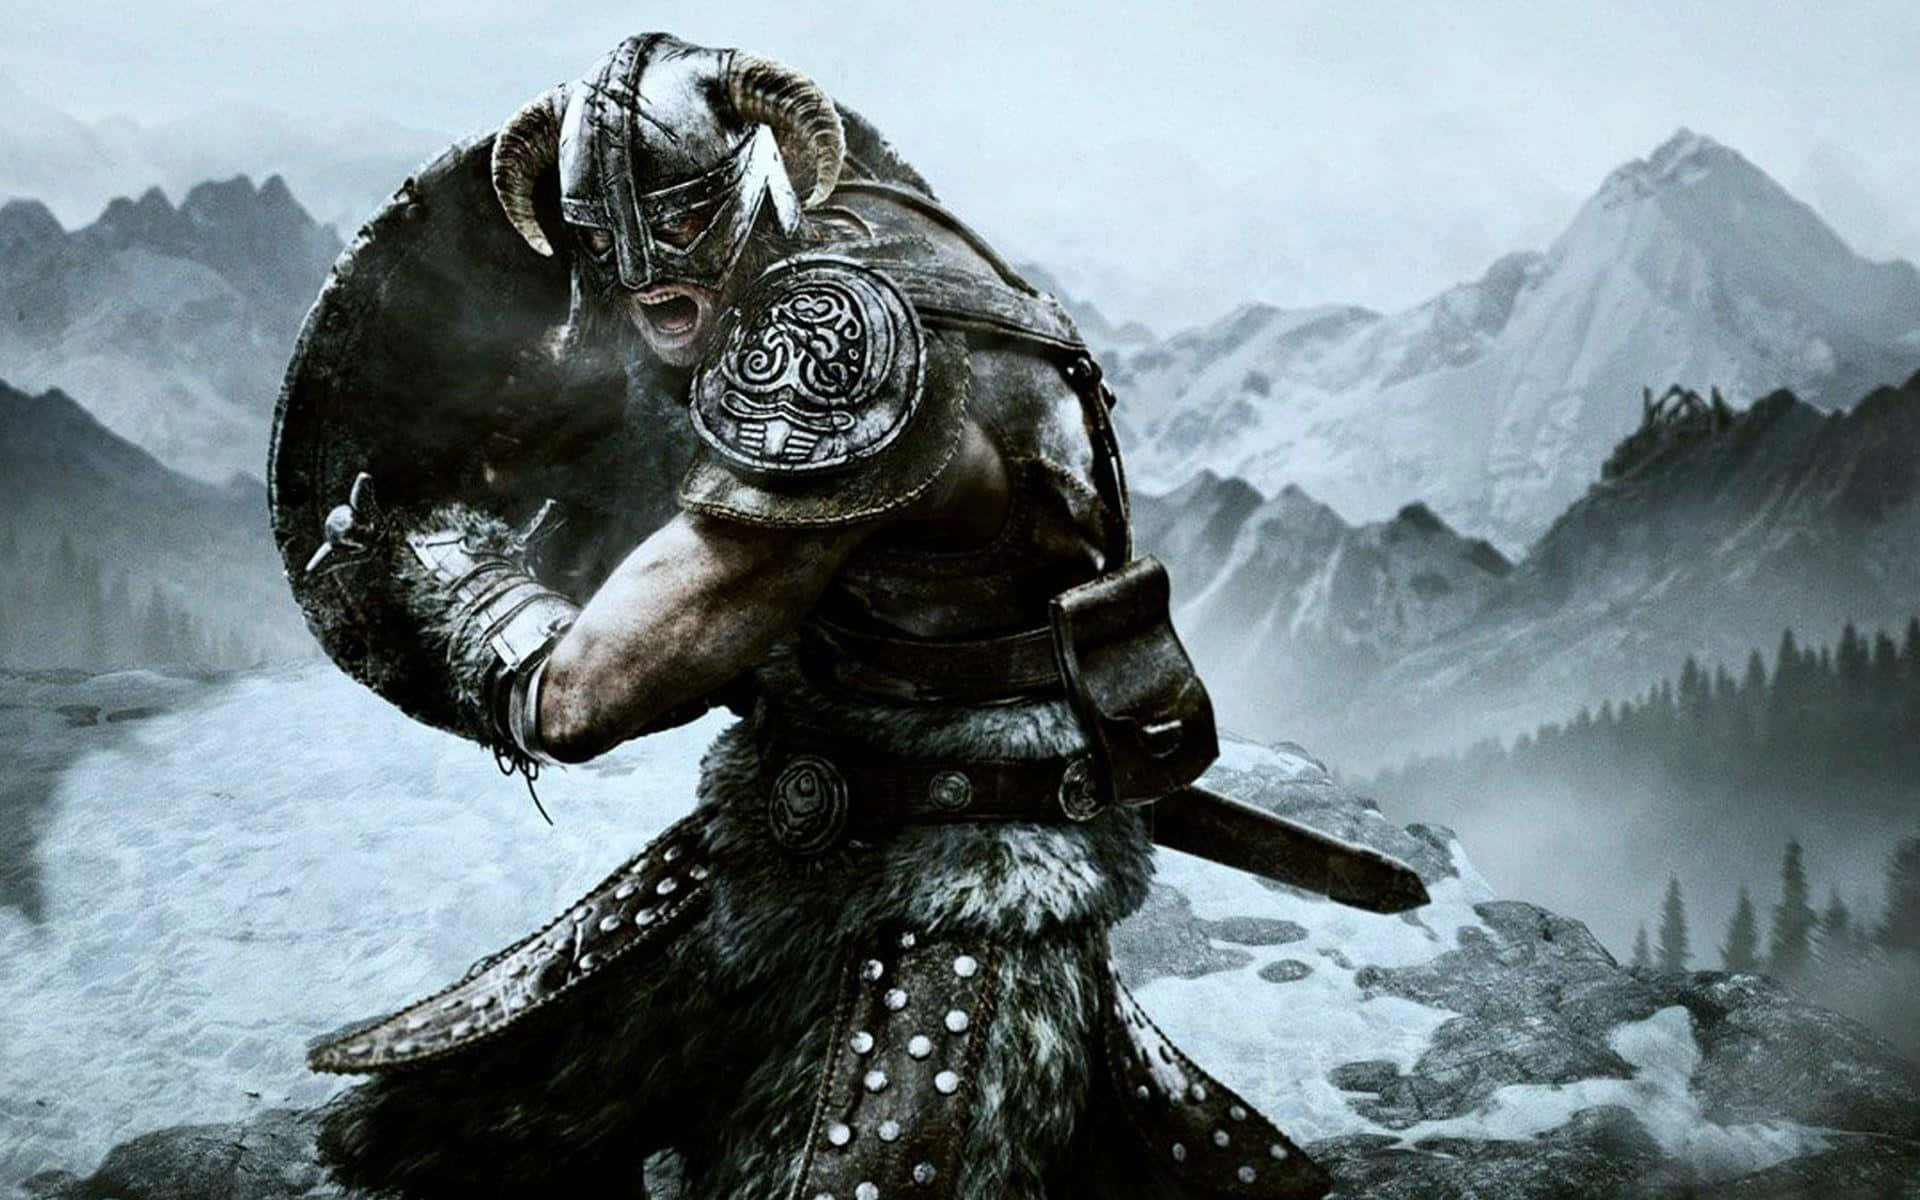 The Dovahkiin, Dragonborn Hero Of Skyrim, Standing Strong Against The Backdrop Of Nordic Scenery Background